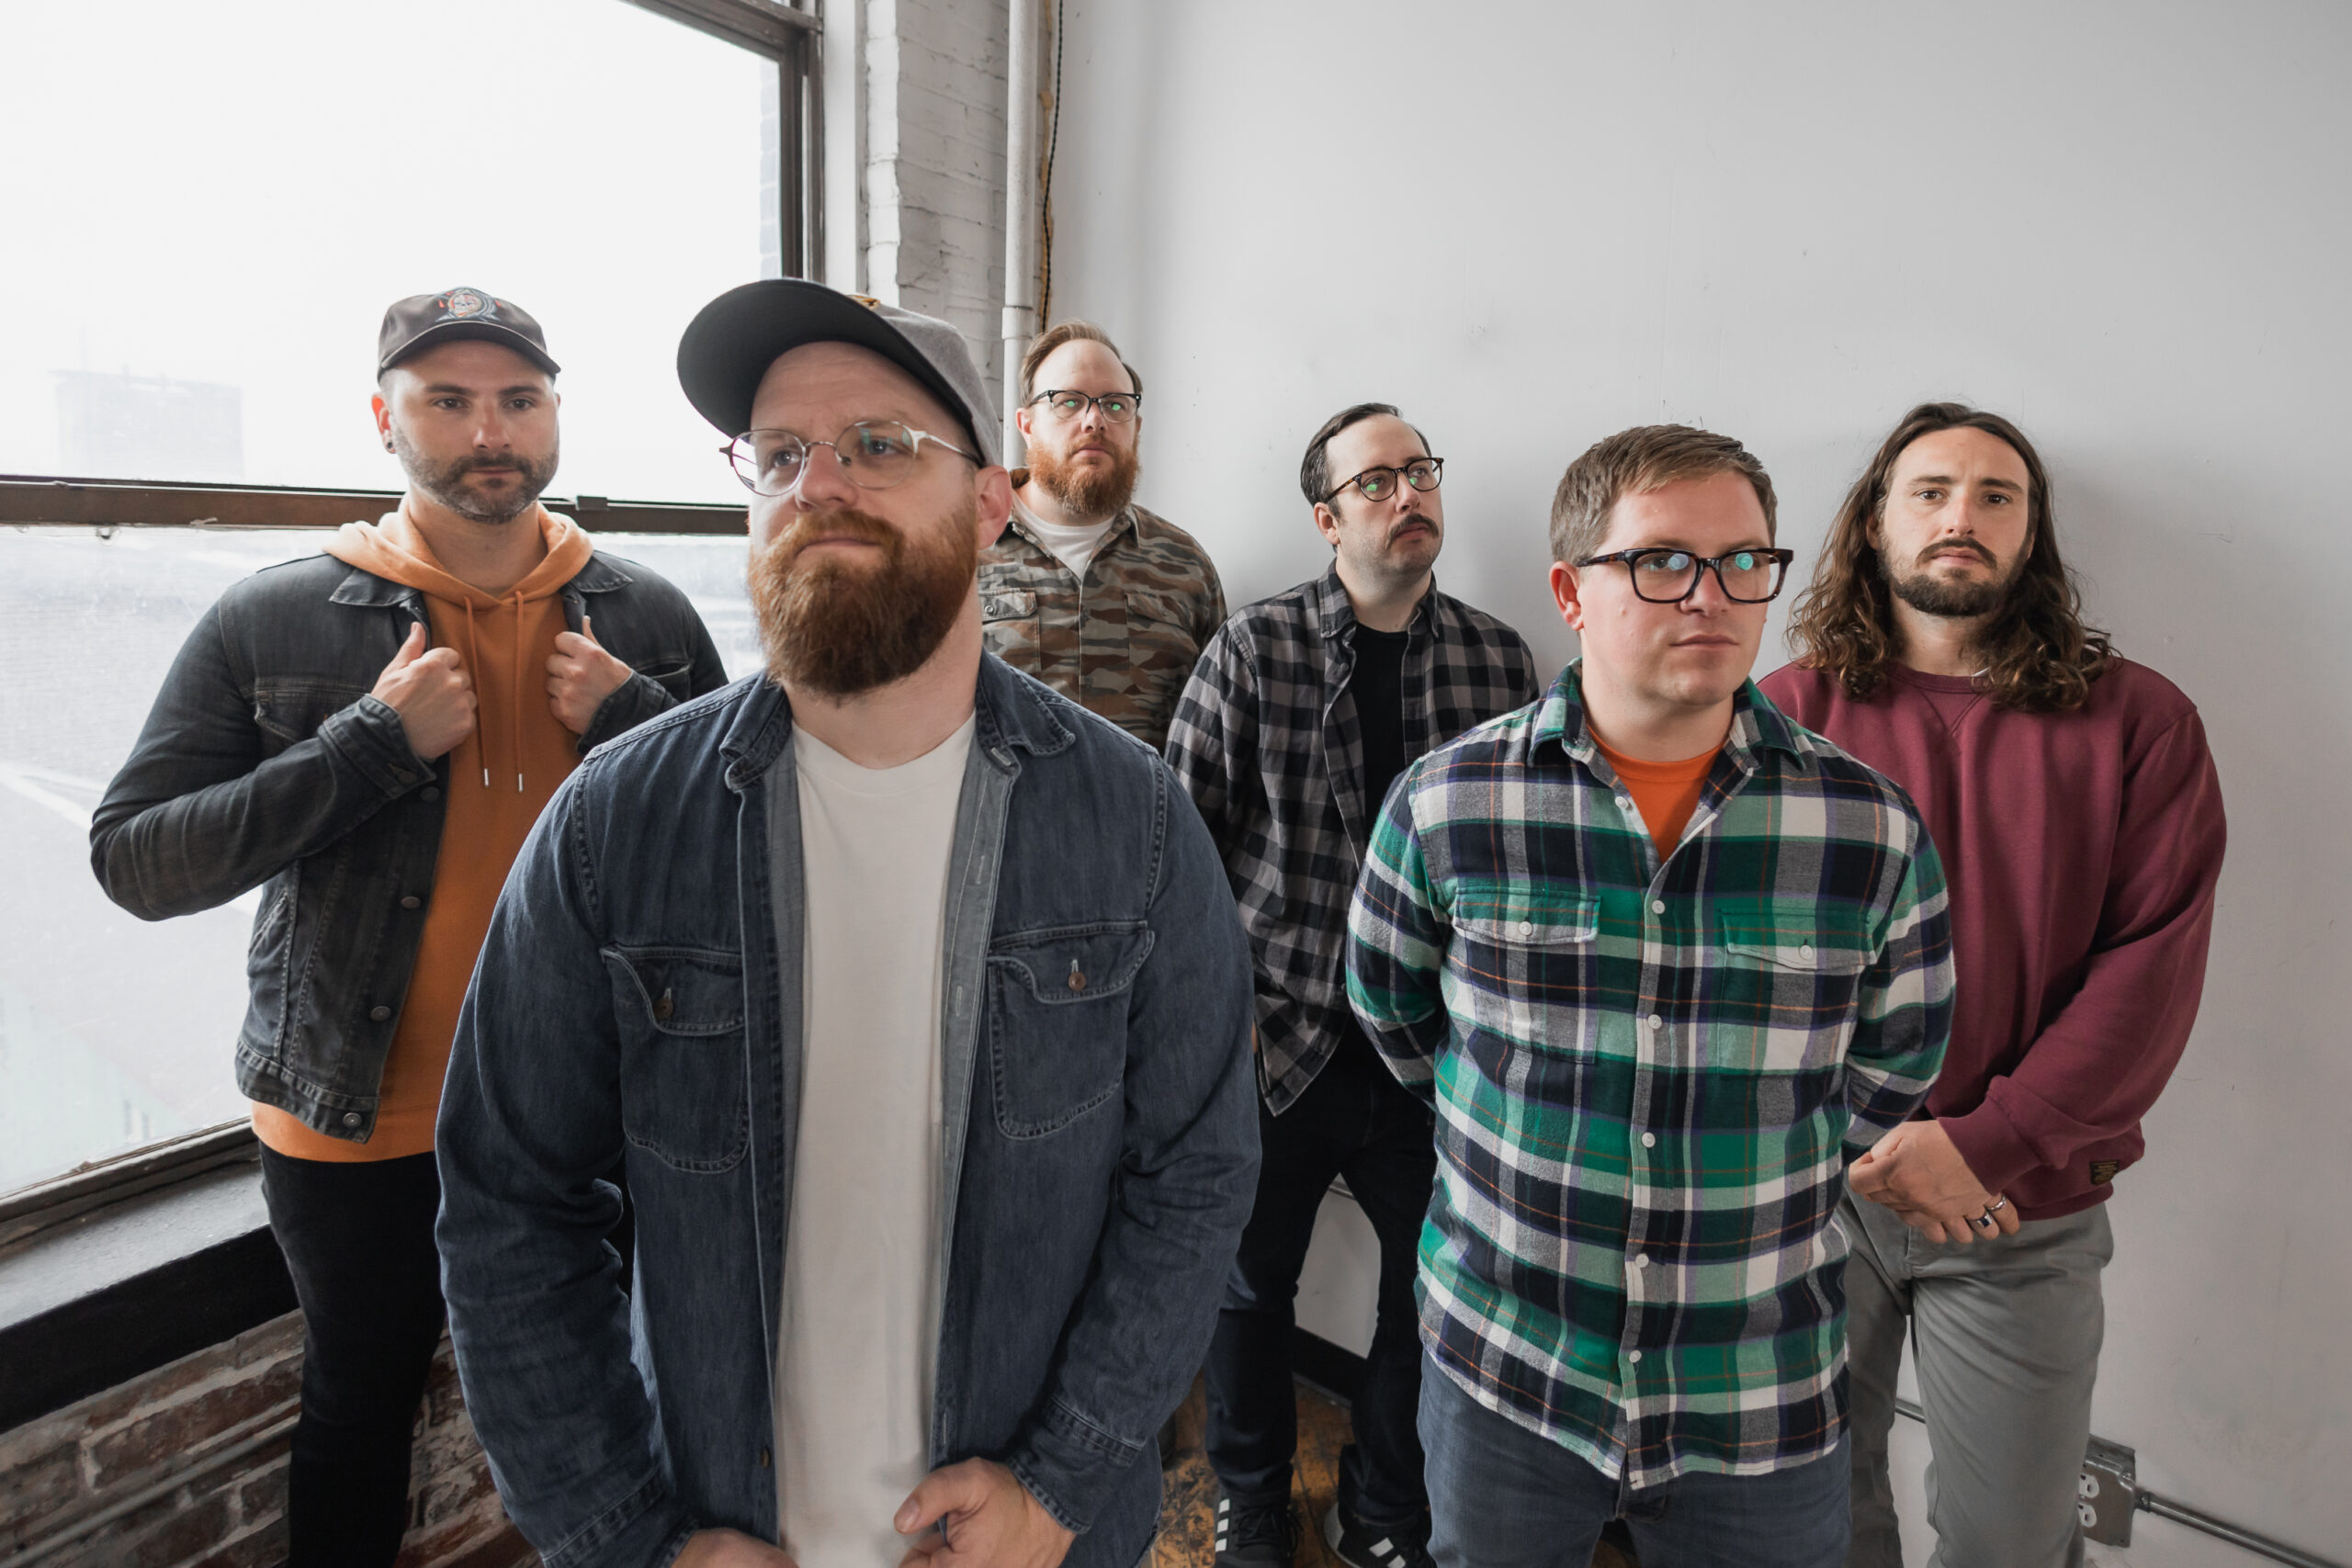 The Wonder Years Resurrect an Interrupted Life on 'Thanks For the Ride'